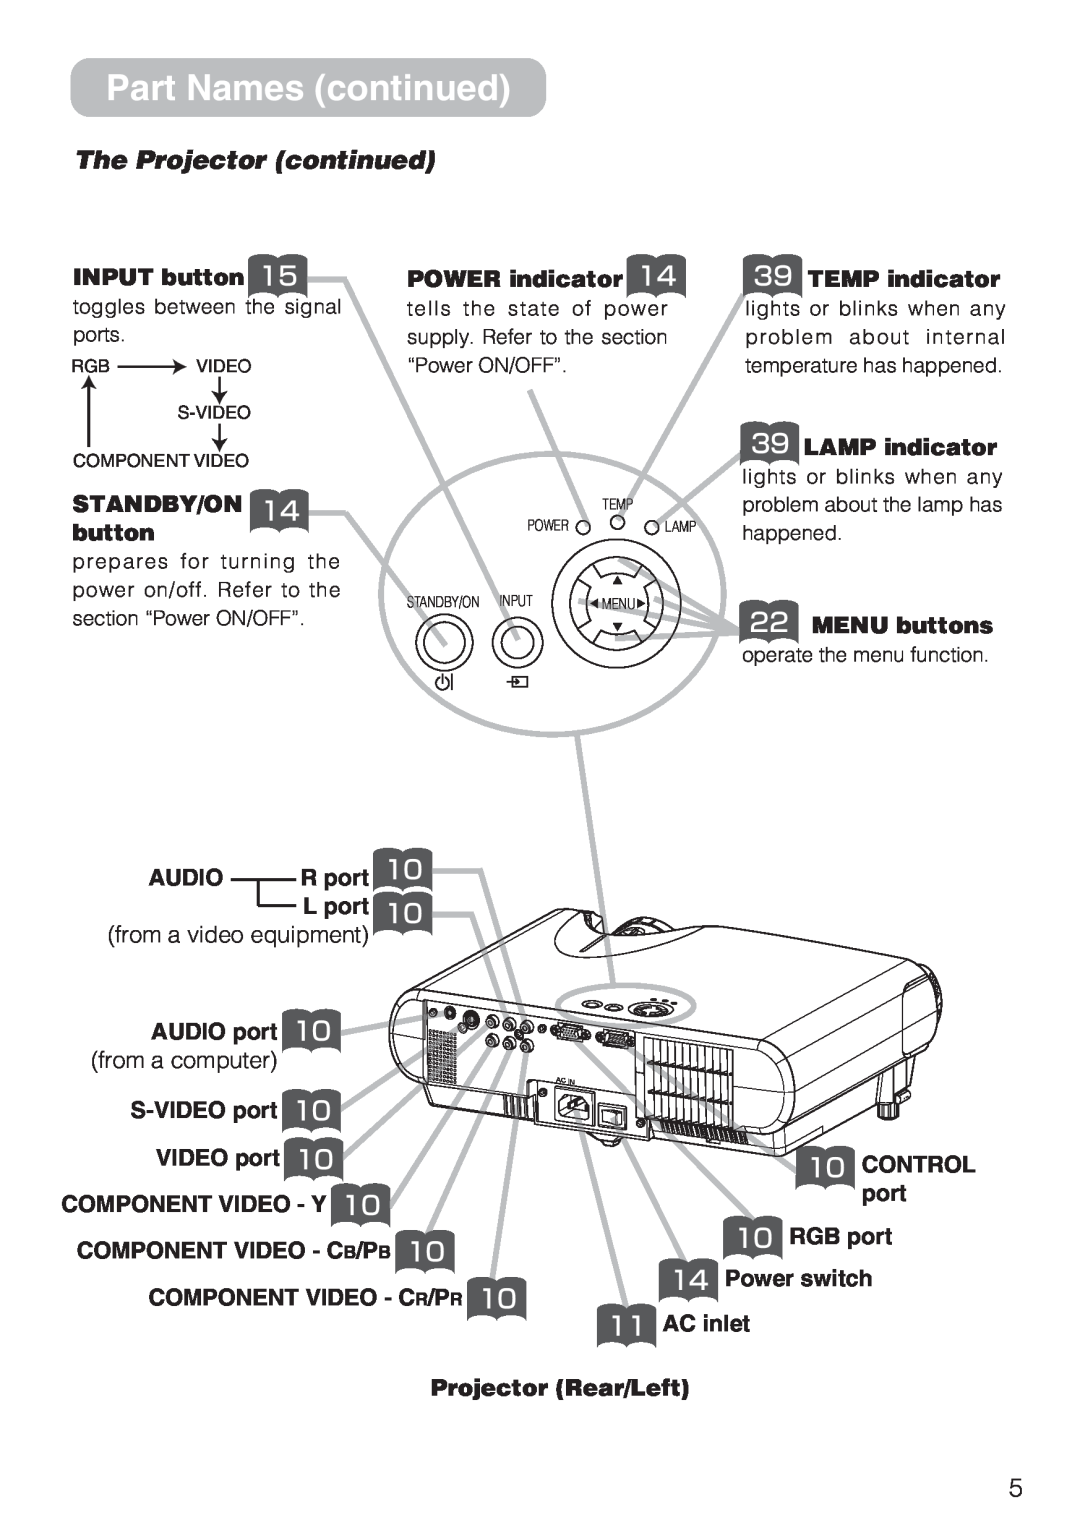 Dukane 8044 manual Part Names continued, The Projector continued, INPUT button, POWER indicator, TEMP indicator, Standby/On 